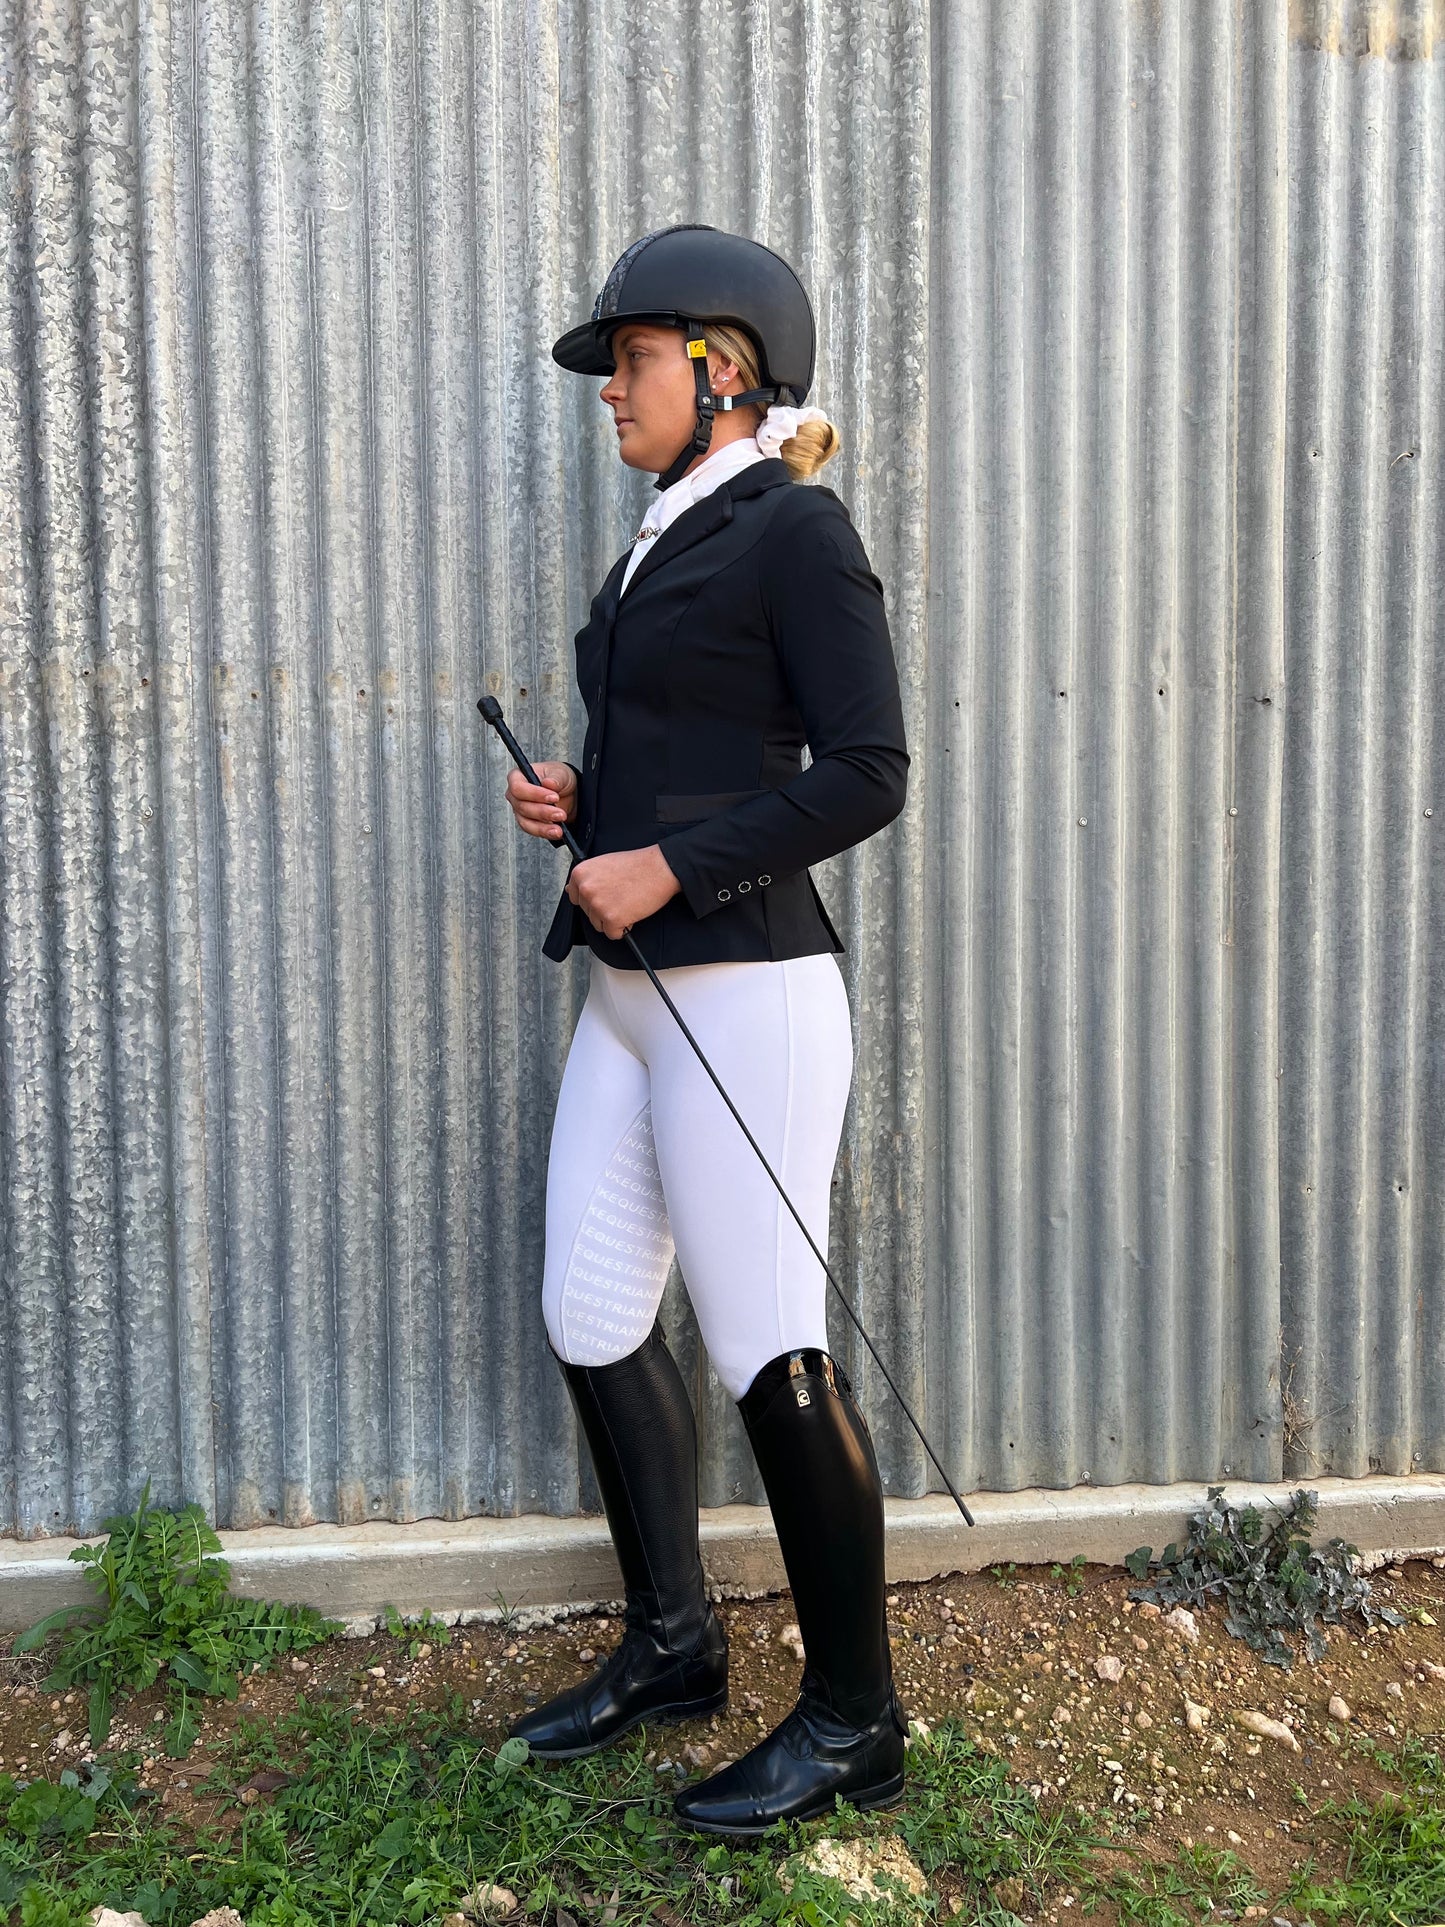 Equestrian in helmet and horse riding tights stands by corrugated wall.